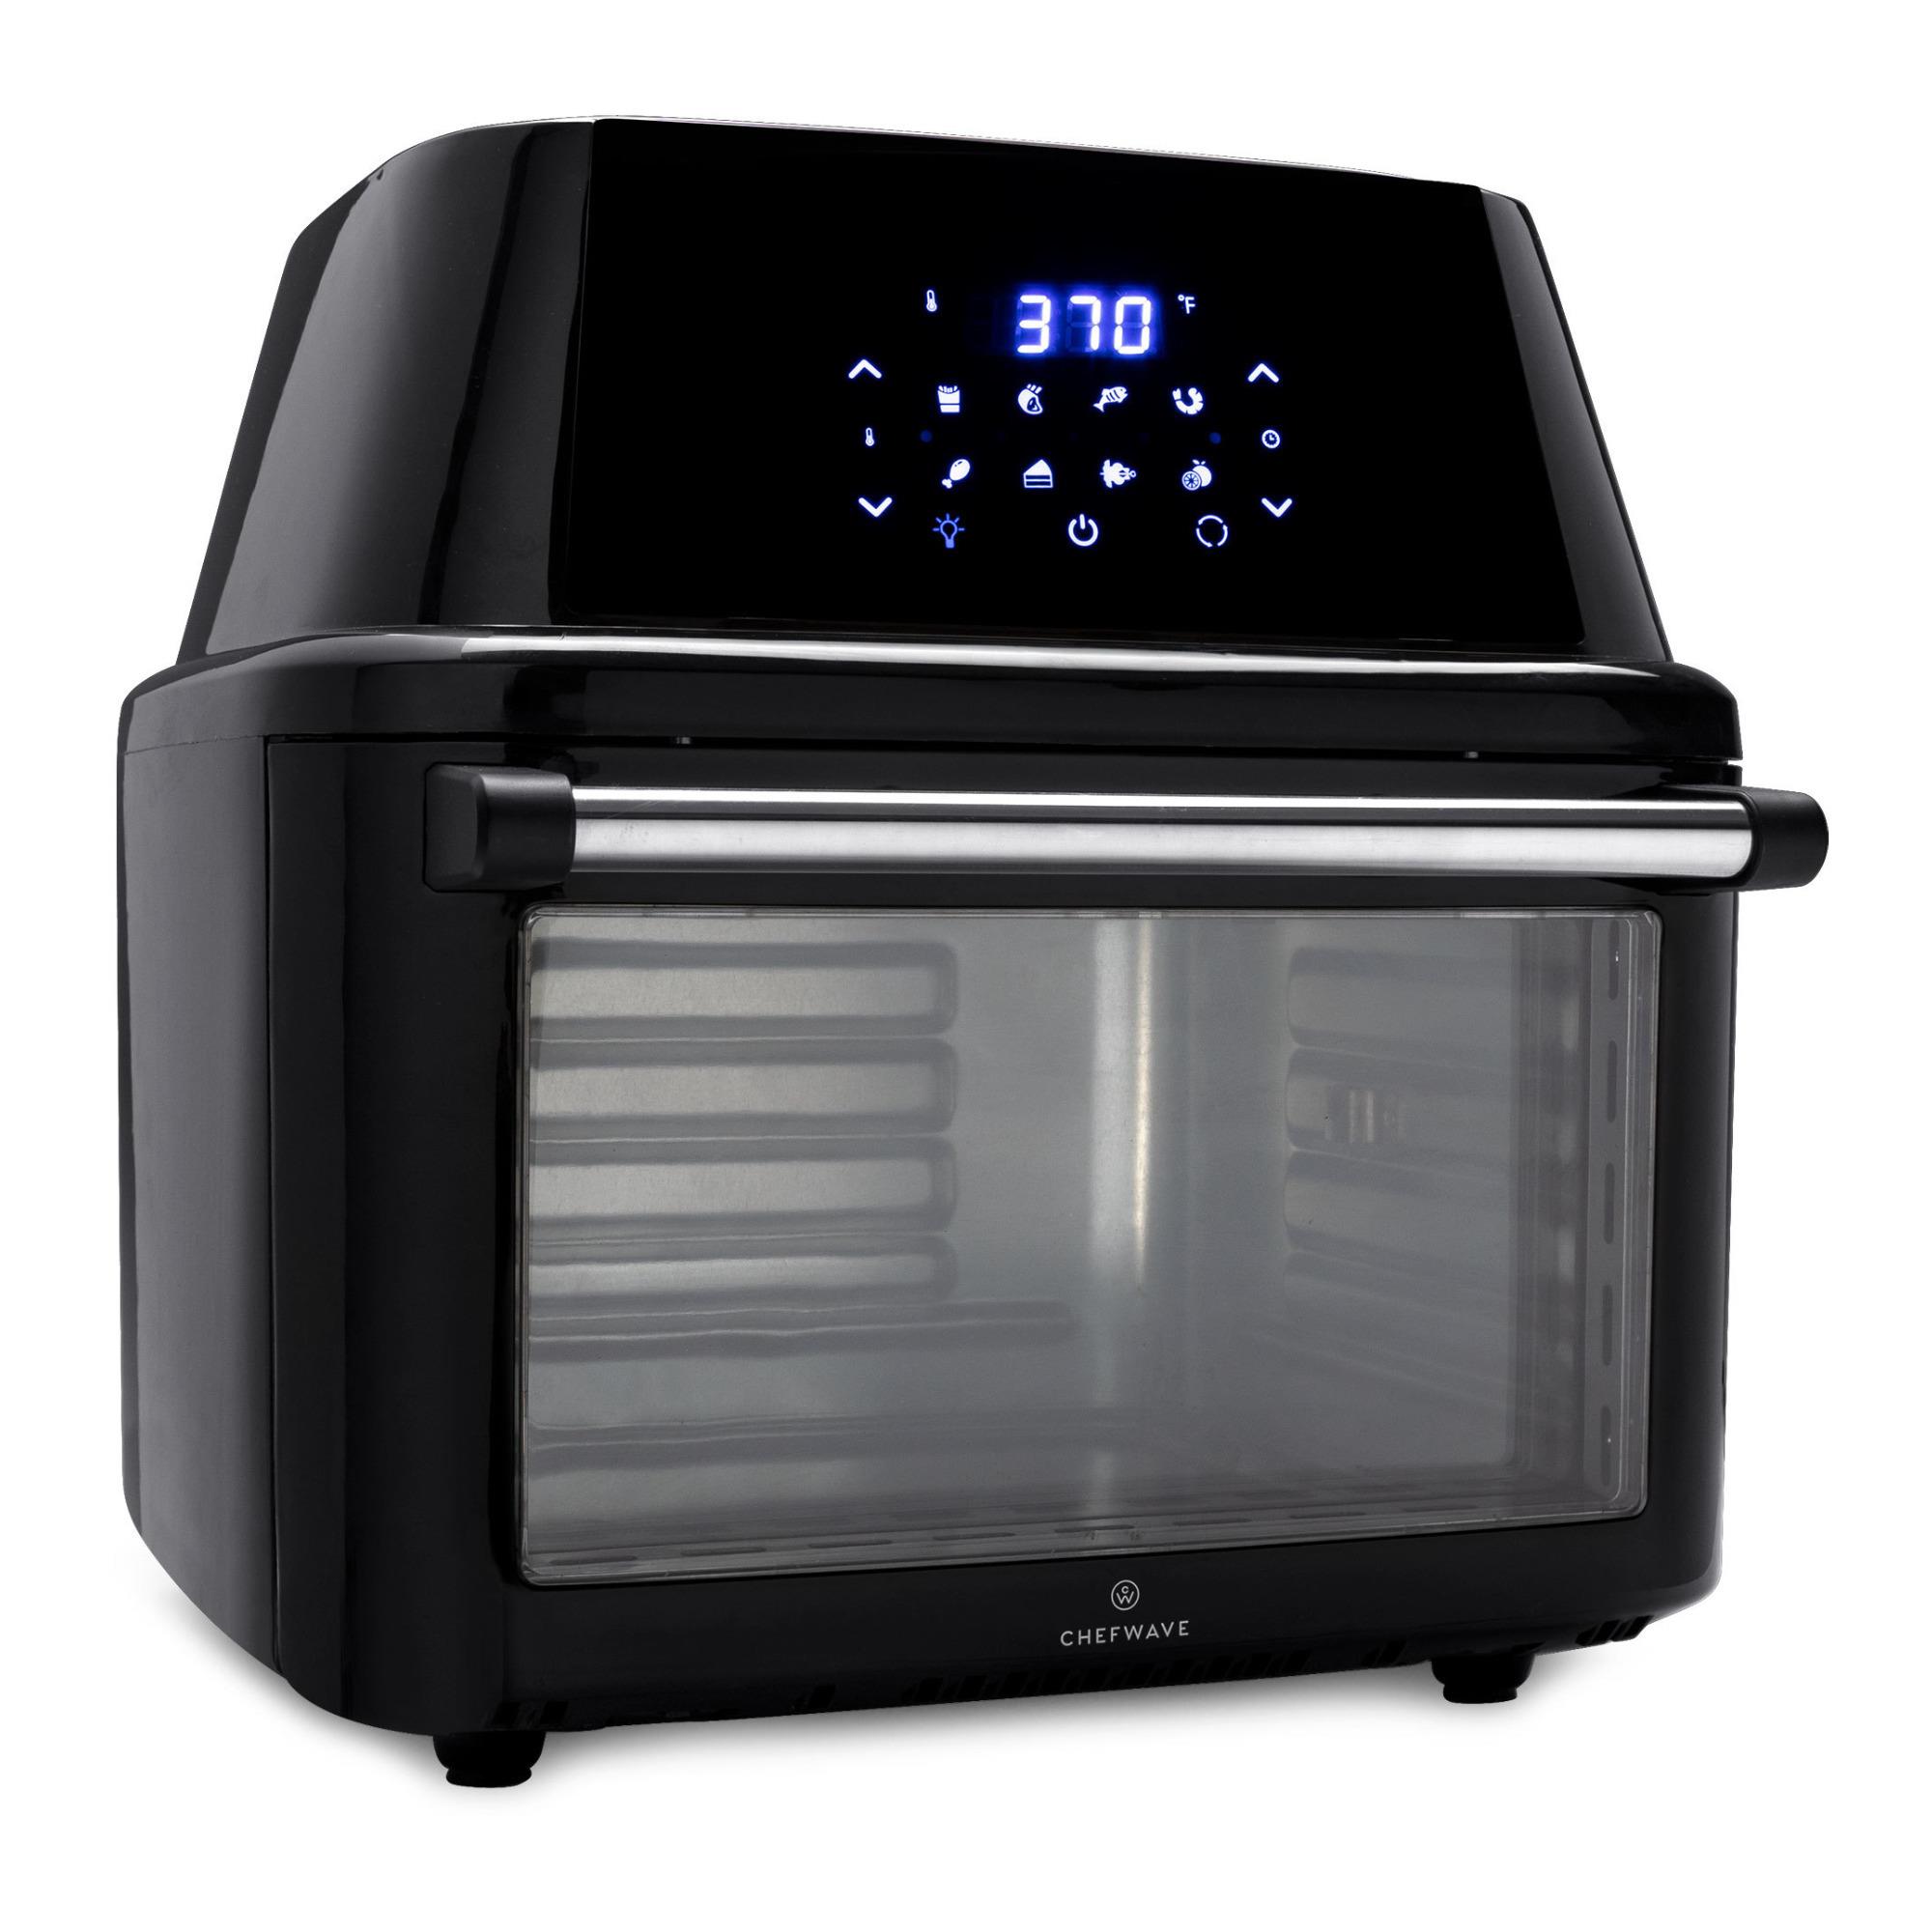 ChefWave Magma 16 qt. Multifunctional Air Fryer Oven with Rotisserie, Dehydrator and Accessories - image 4 of 13